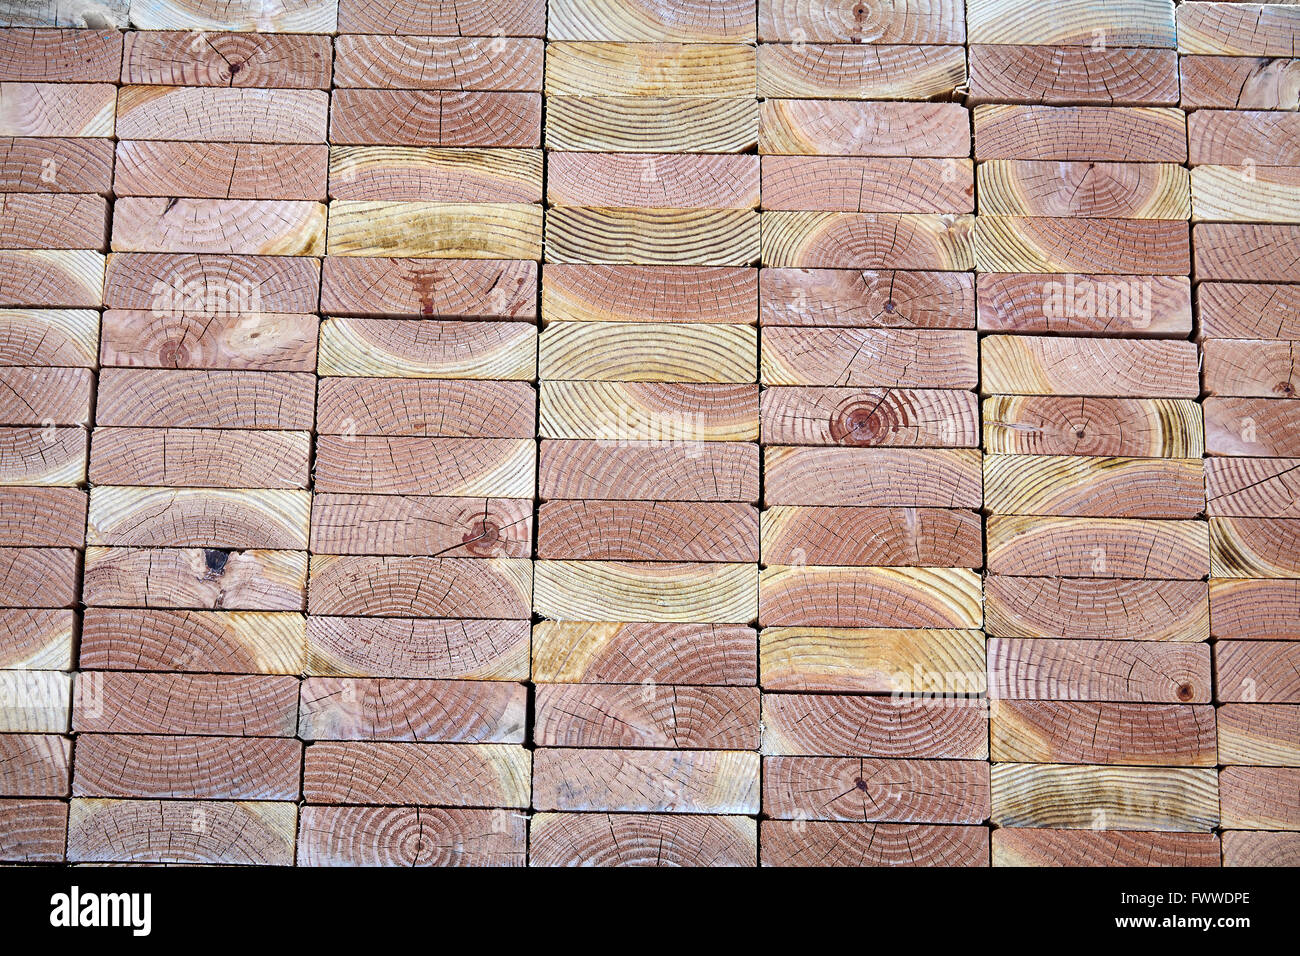 wood construction materials for building industry Stock Photo